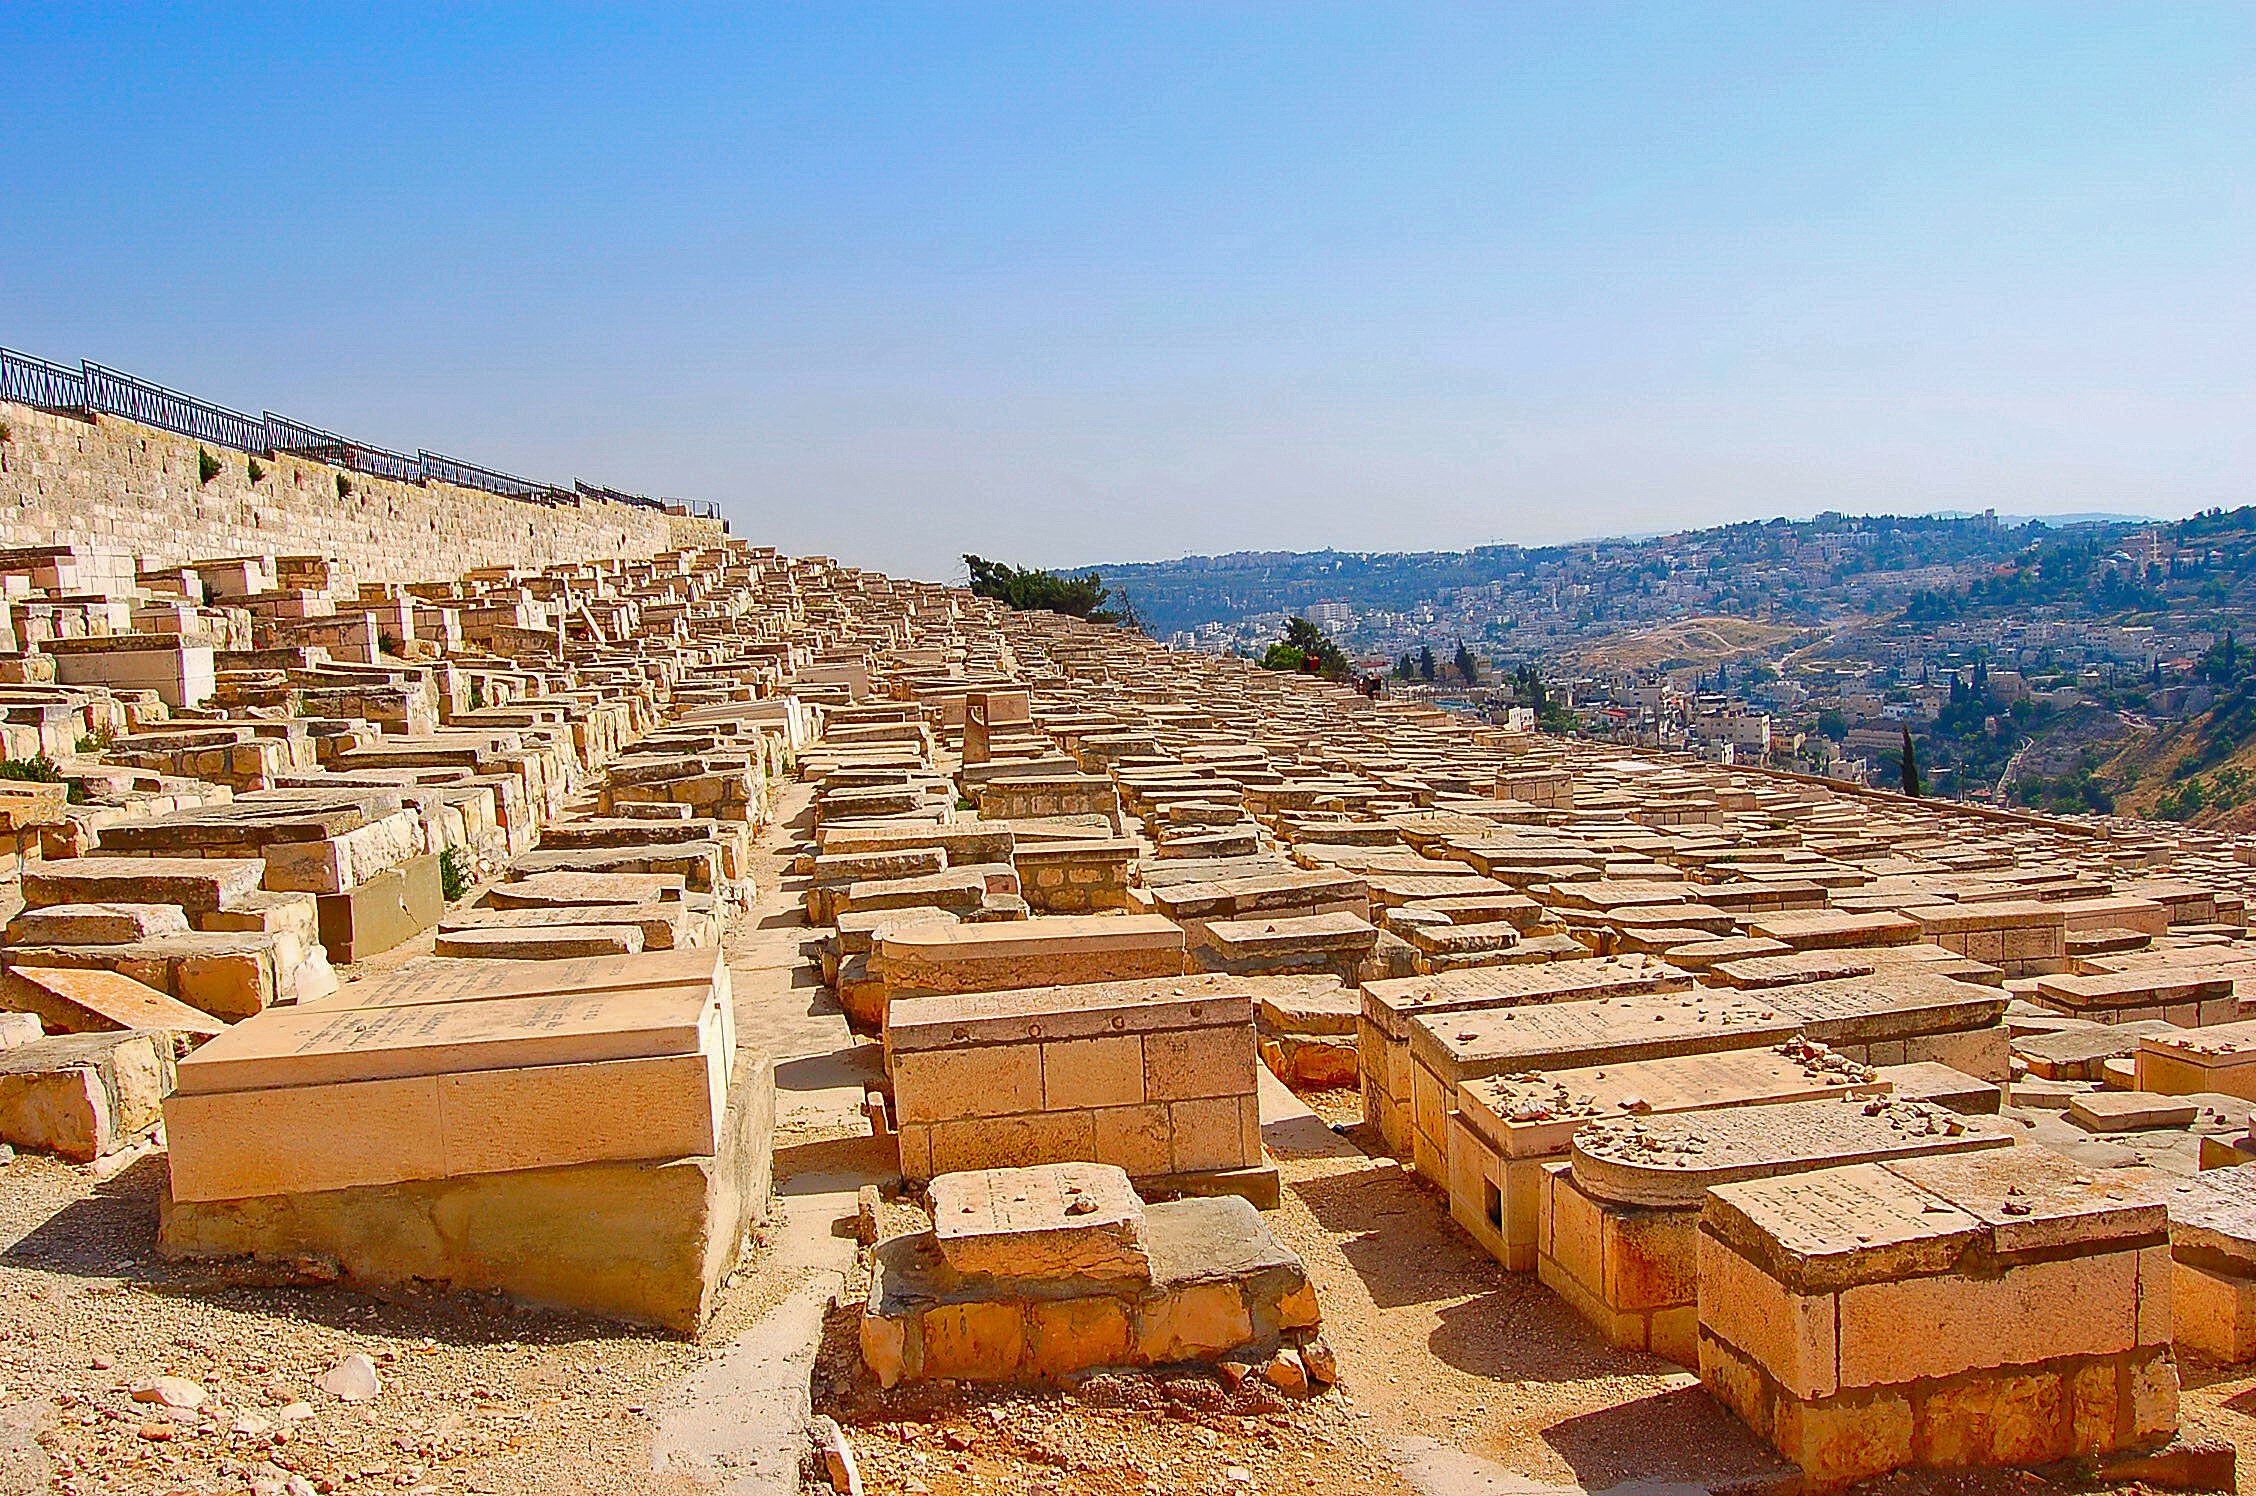 Cemetery on Mount of Olives. (Photo by Don Knebel)